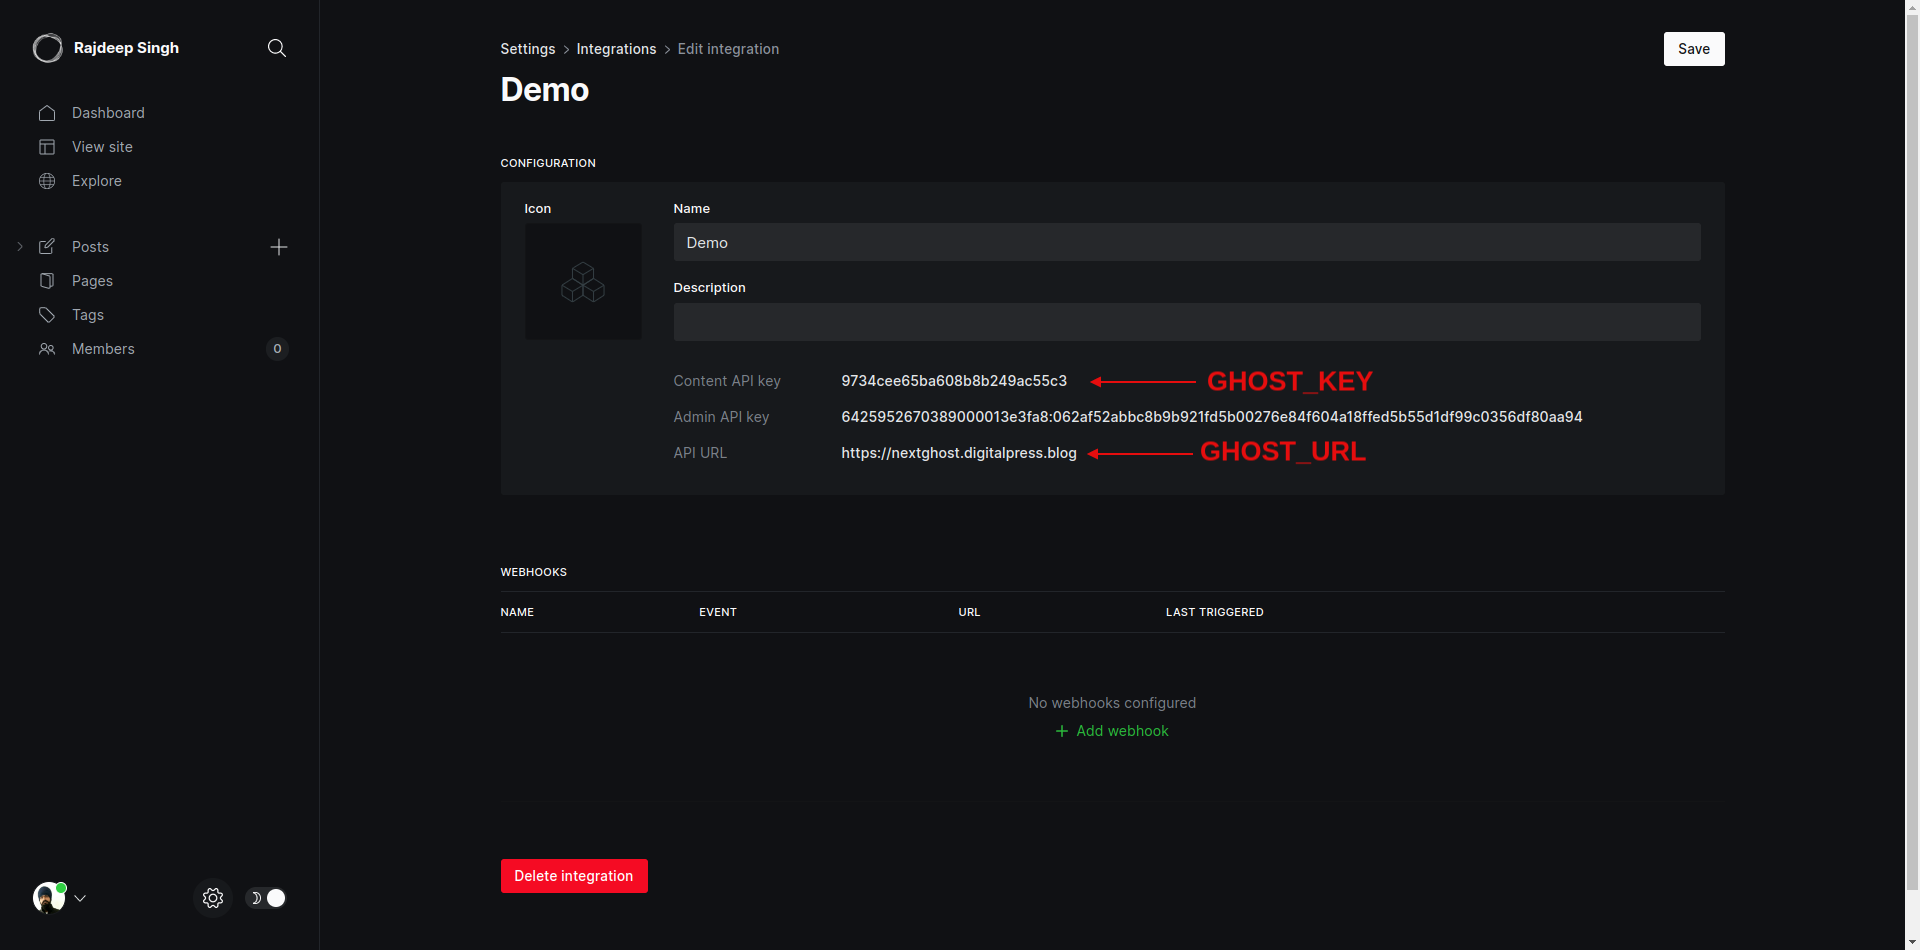 Get your Ghost_Key and Ghost_URL